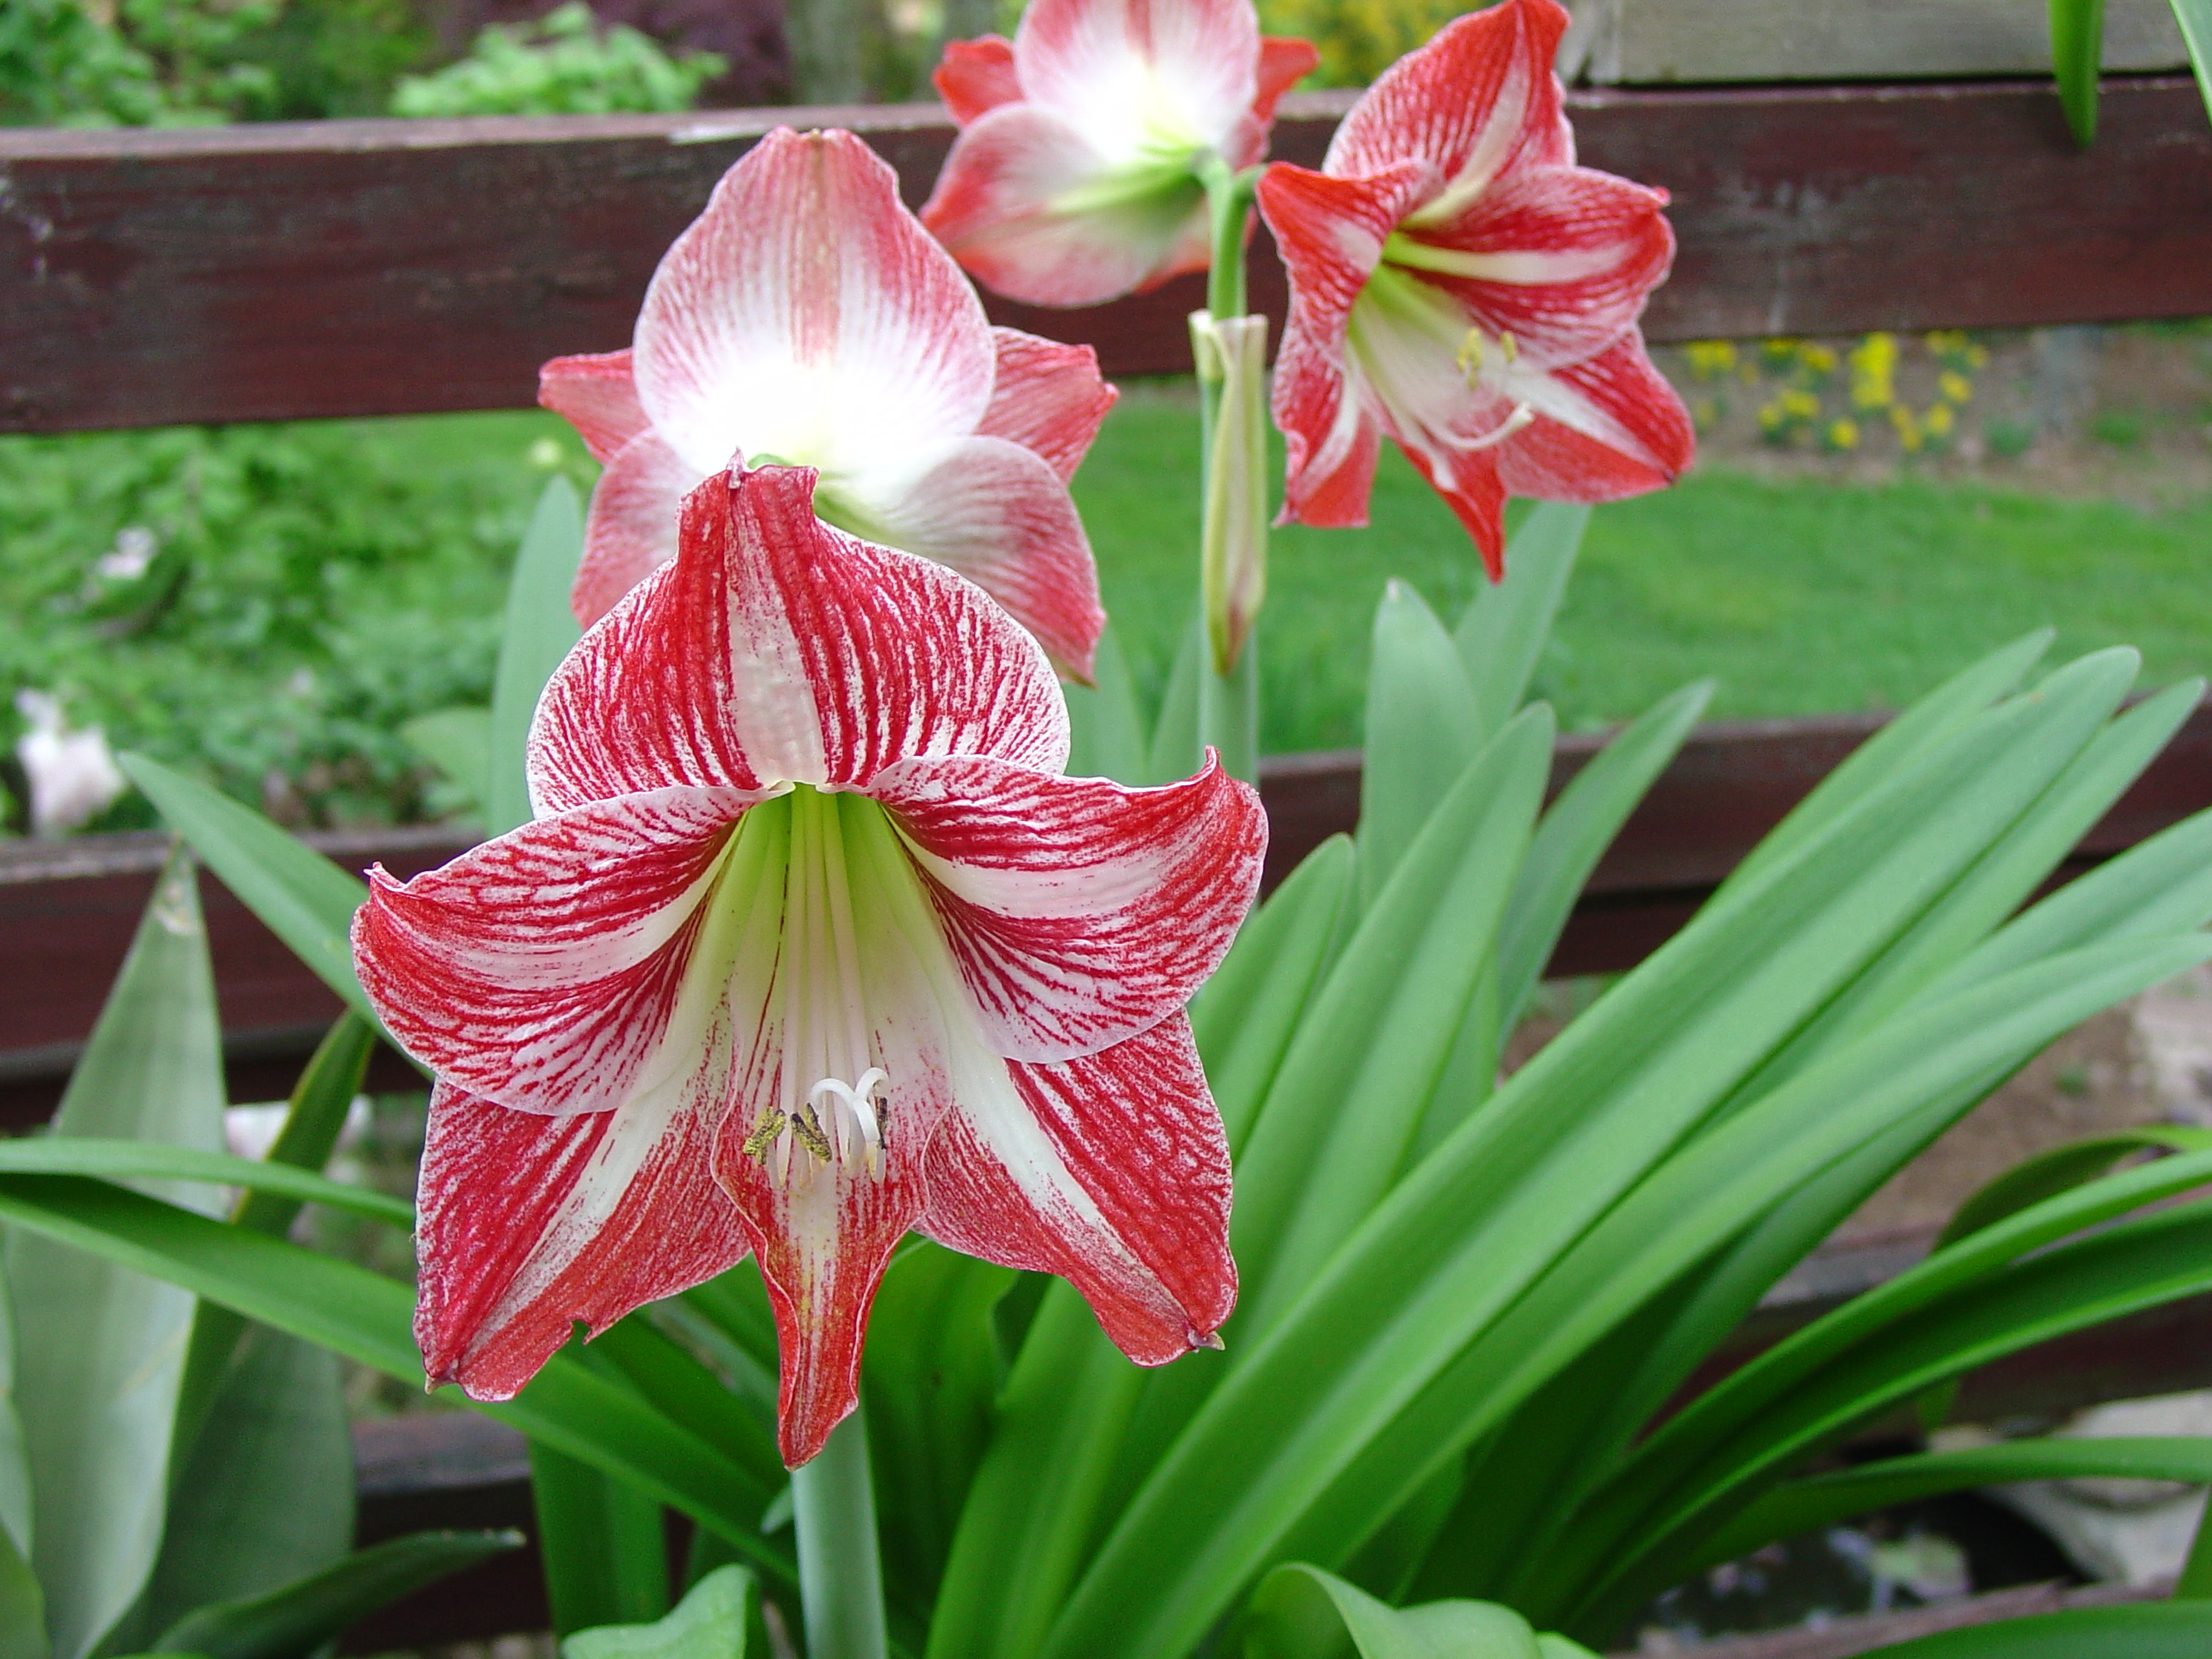 Growing Amaryllis | What Grows There :: Hugh Conlon, Horticulturalist